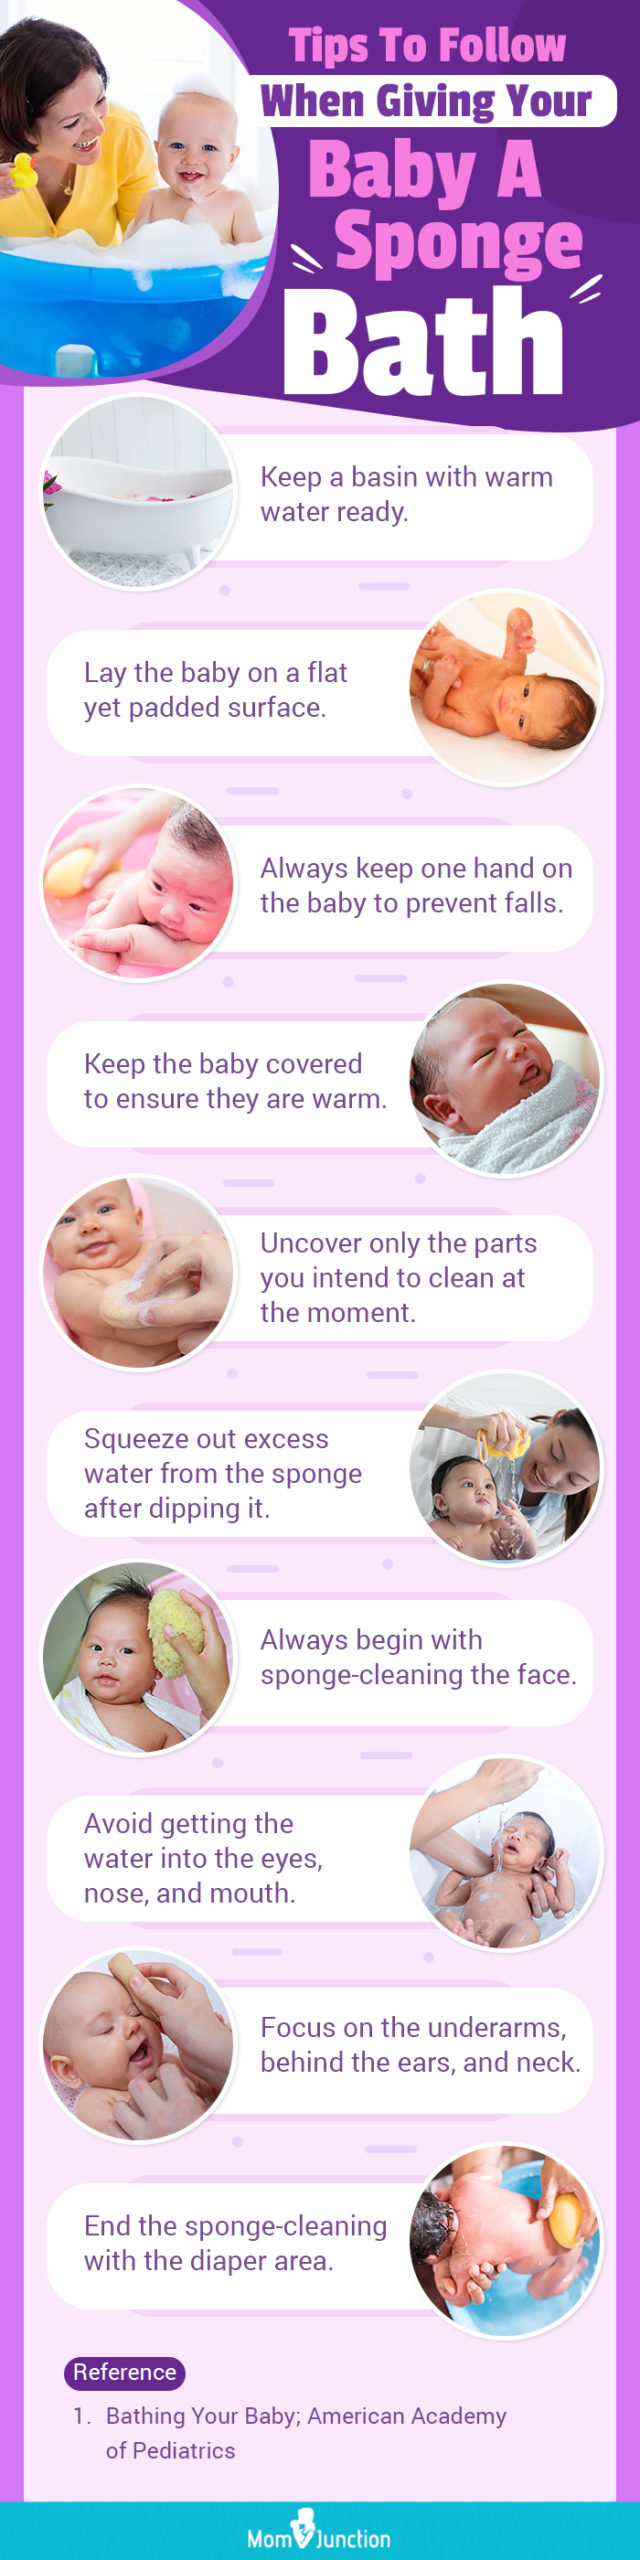 Tips To Follow When Giving Your Baby A Sponge Bath (infographic)